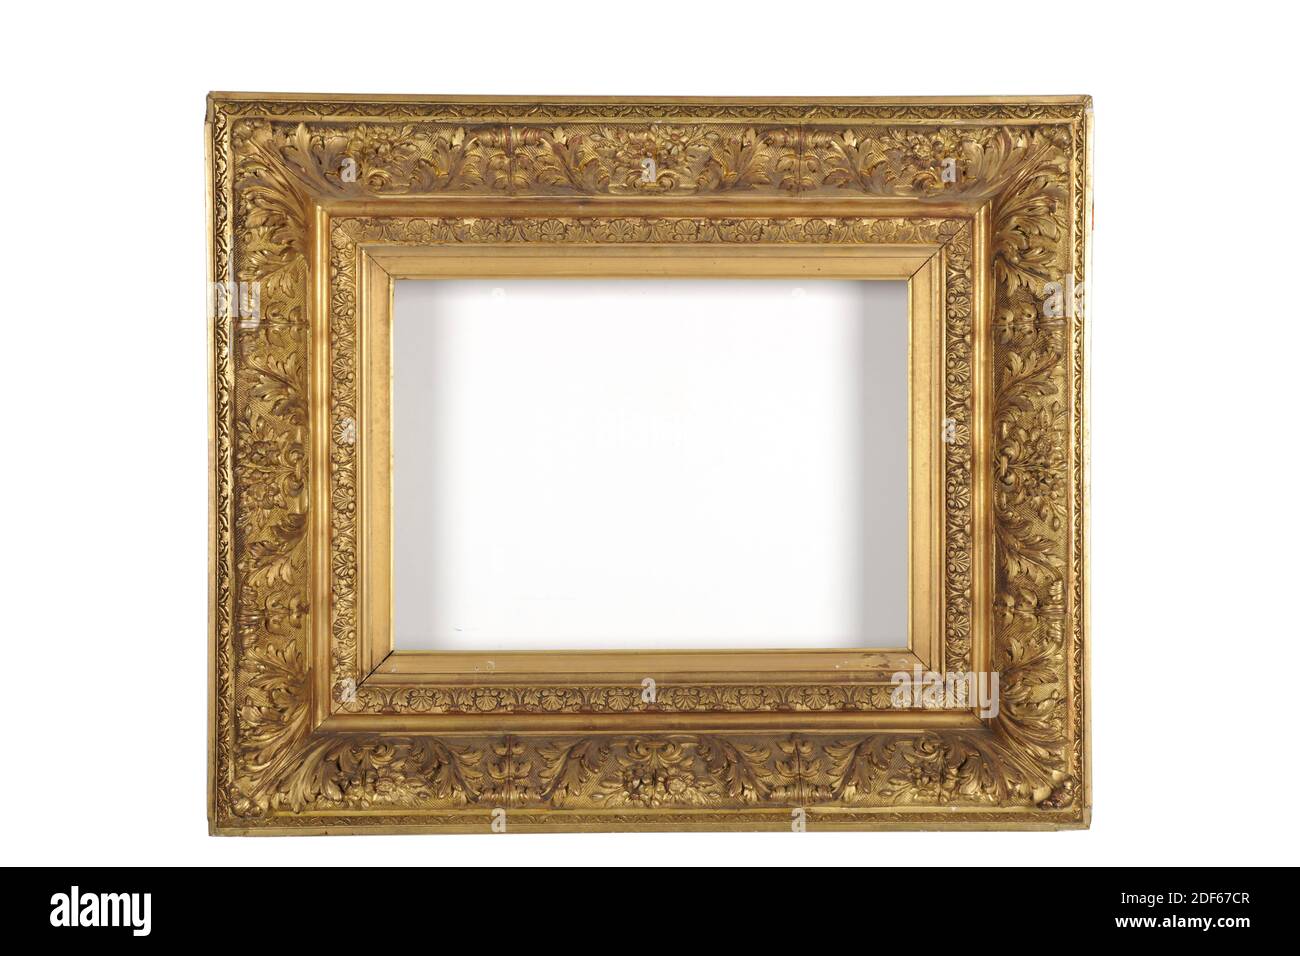 picture frame, Anonymous, second half 19th century, plaster, gilding, wood, gilded, Picture frame with a hollow frame with wide vertical profile and acanthus leaves in the corners. With a stepped inner edge starting with a pearl edge, then a smooth edge, an ornamental edge and another smooth edge. The frame has a laurel crown. The outer wall is hollow and is closed with a decorative edge, General: 79.5 x 64.4 x 11cm (795 x 644 x 110mm), Inner size: 51.7 x 37.5cm (517 x 375mm), Day size: 49.6 x 34.8cm (496 x 348mm Stock Photo